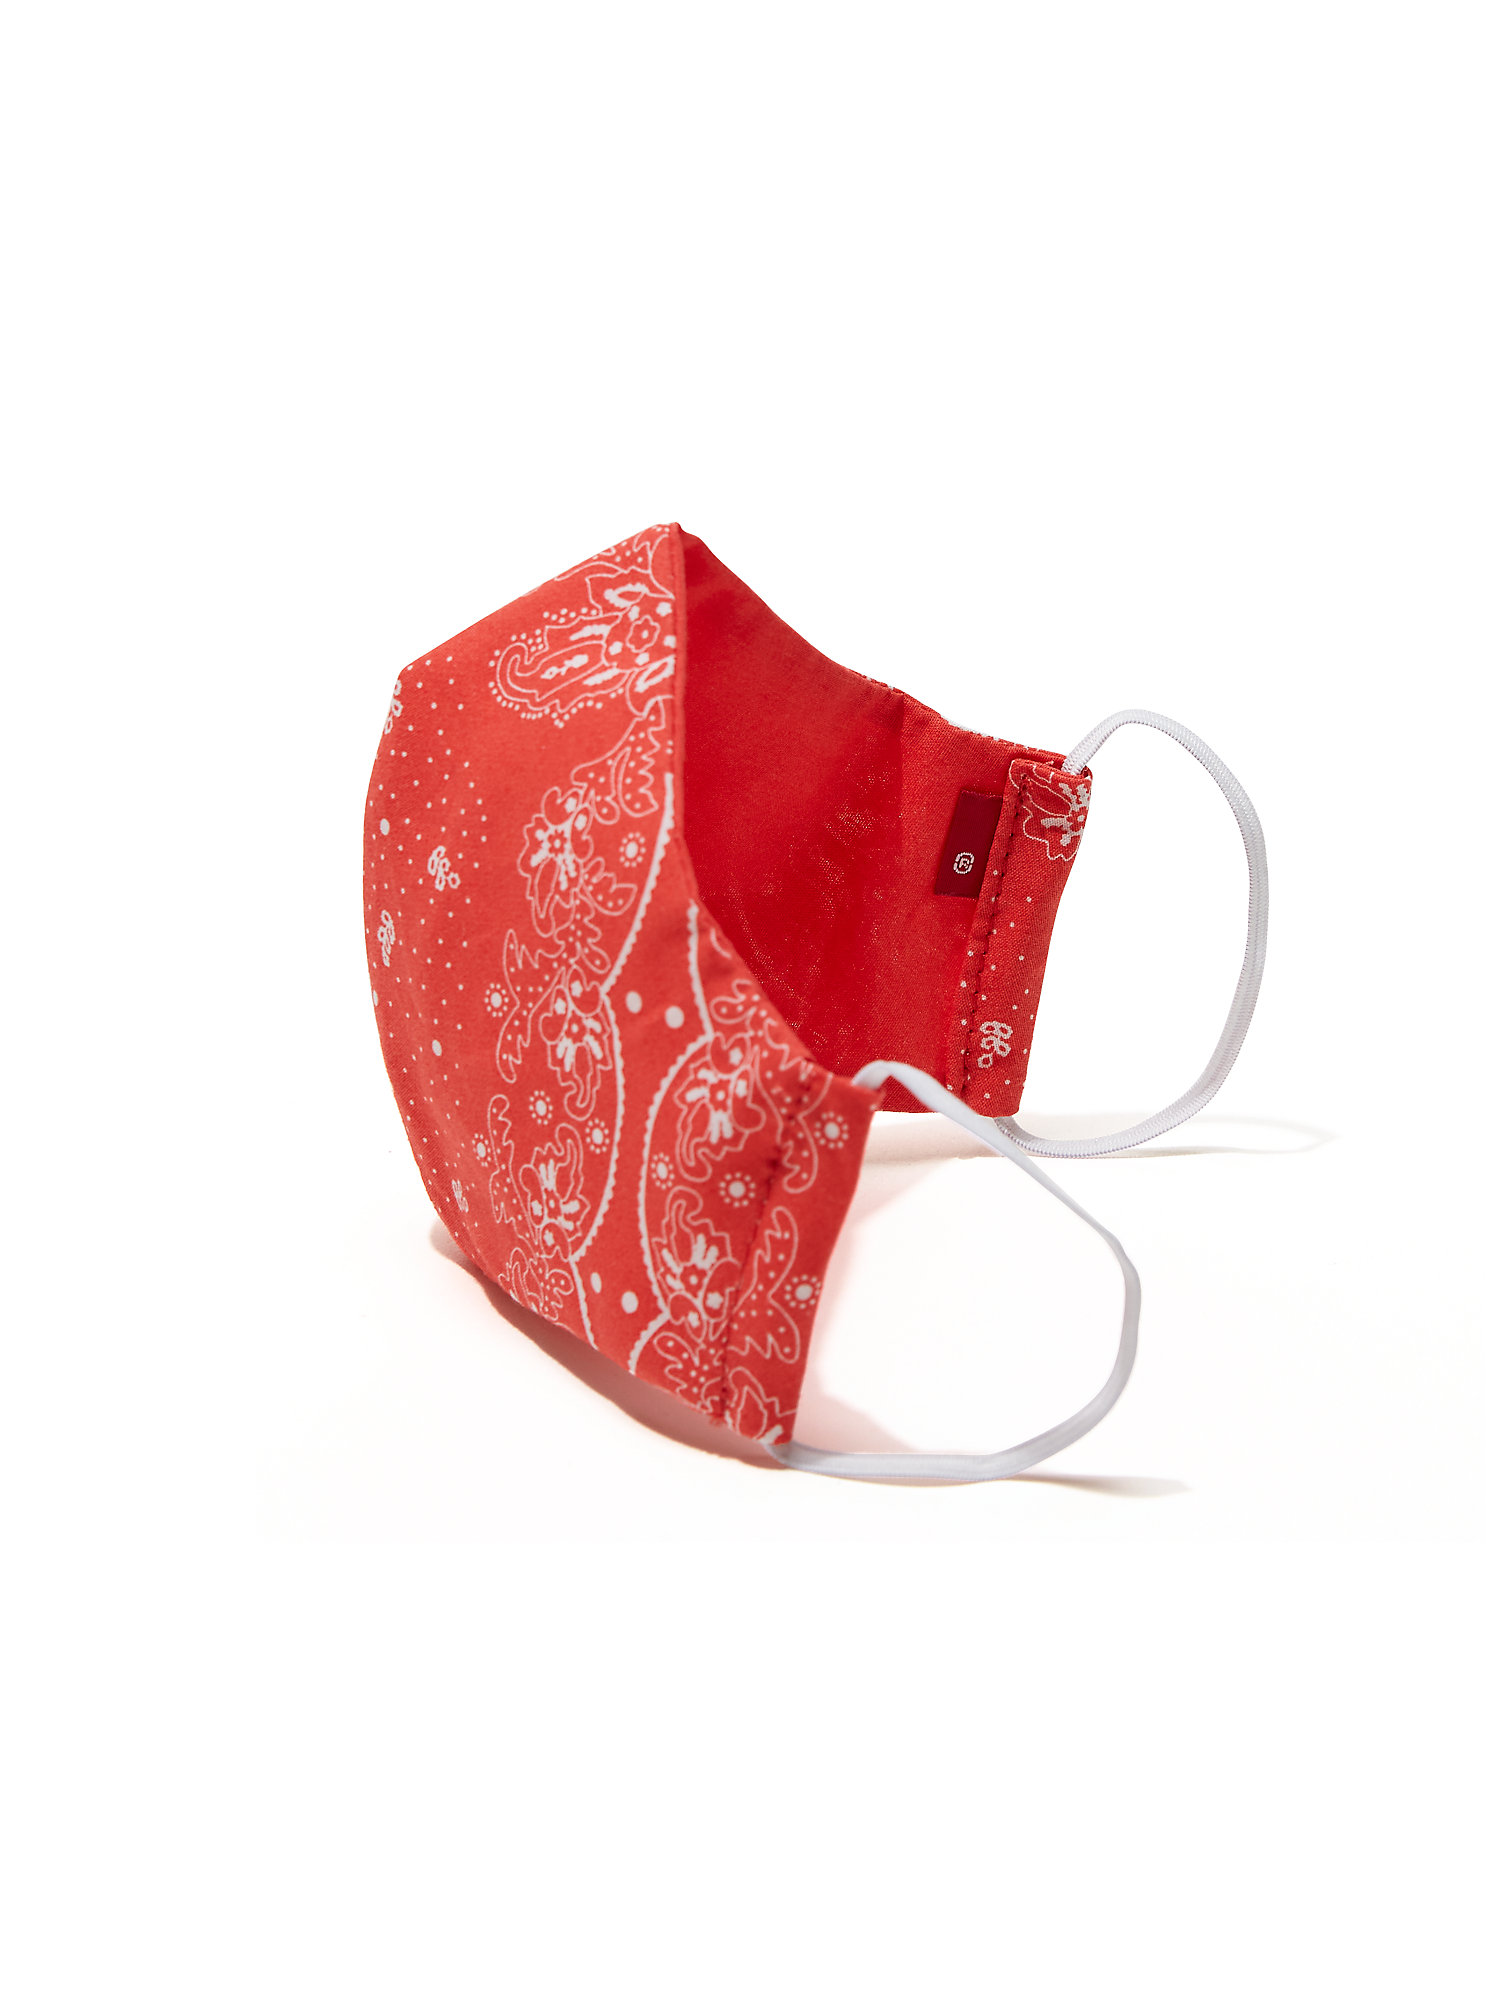 Levi's Reusable Print Face Mask (3 Pack) - image 4 of 4